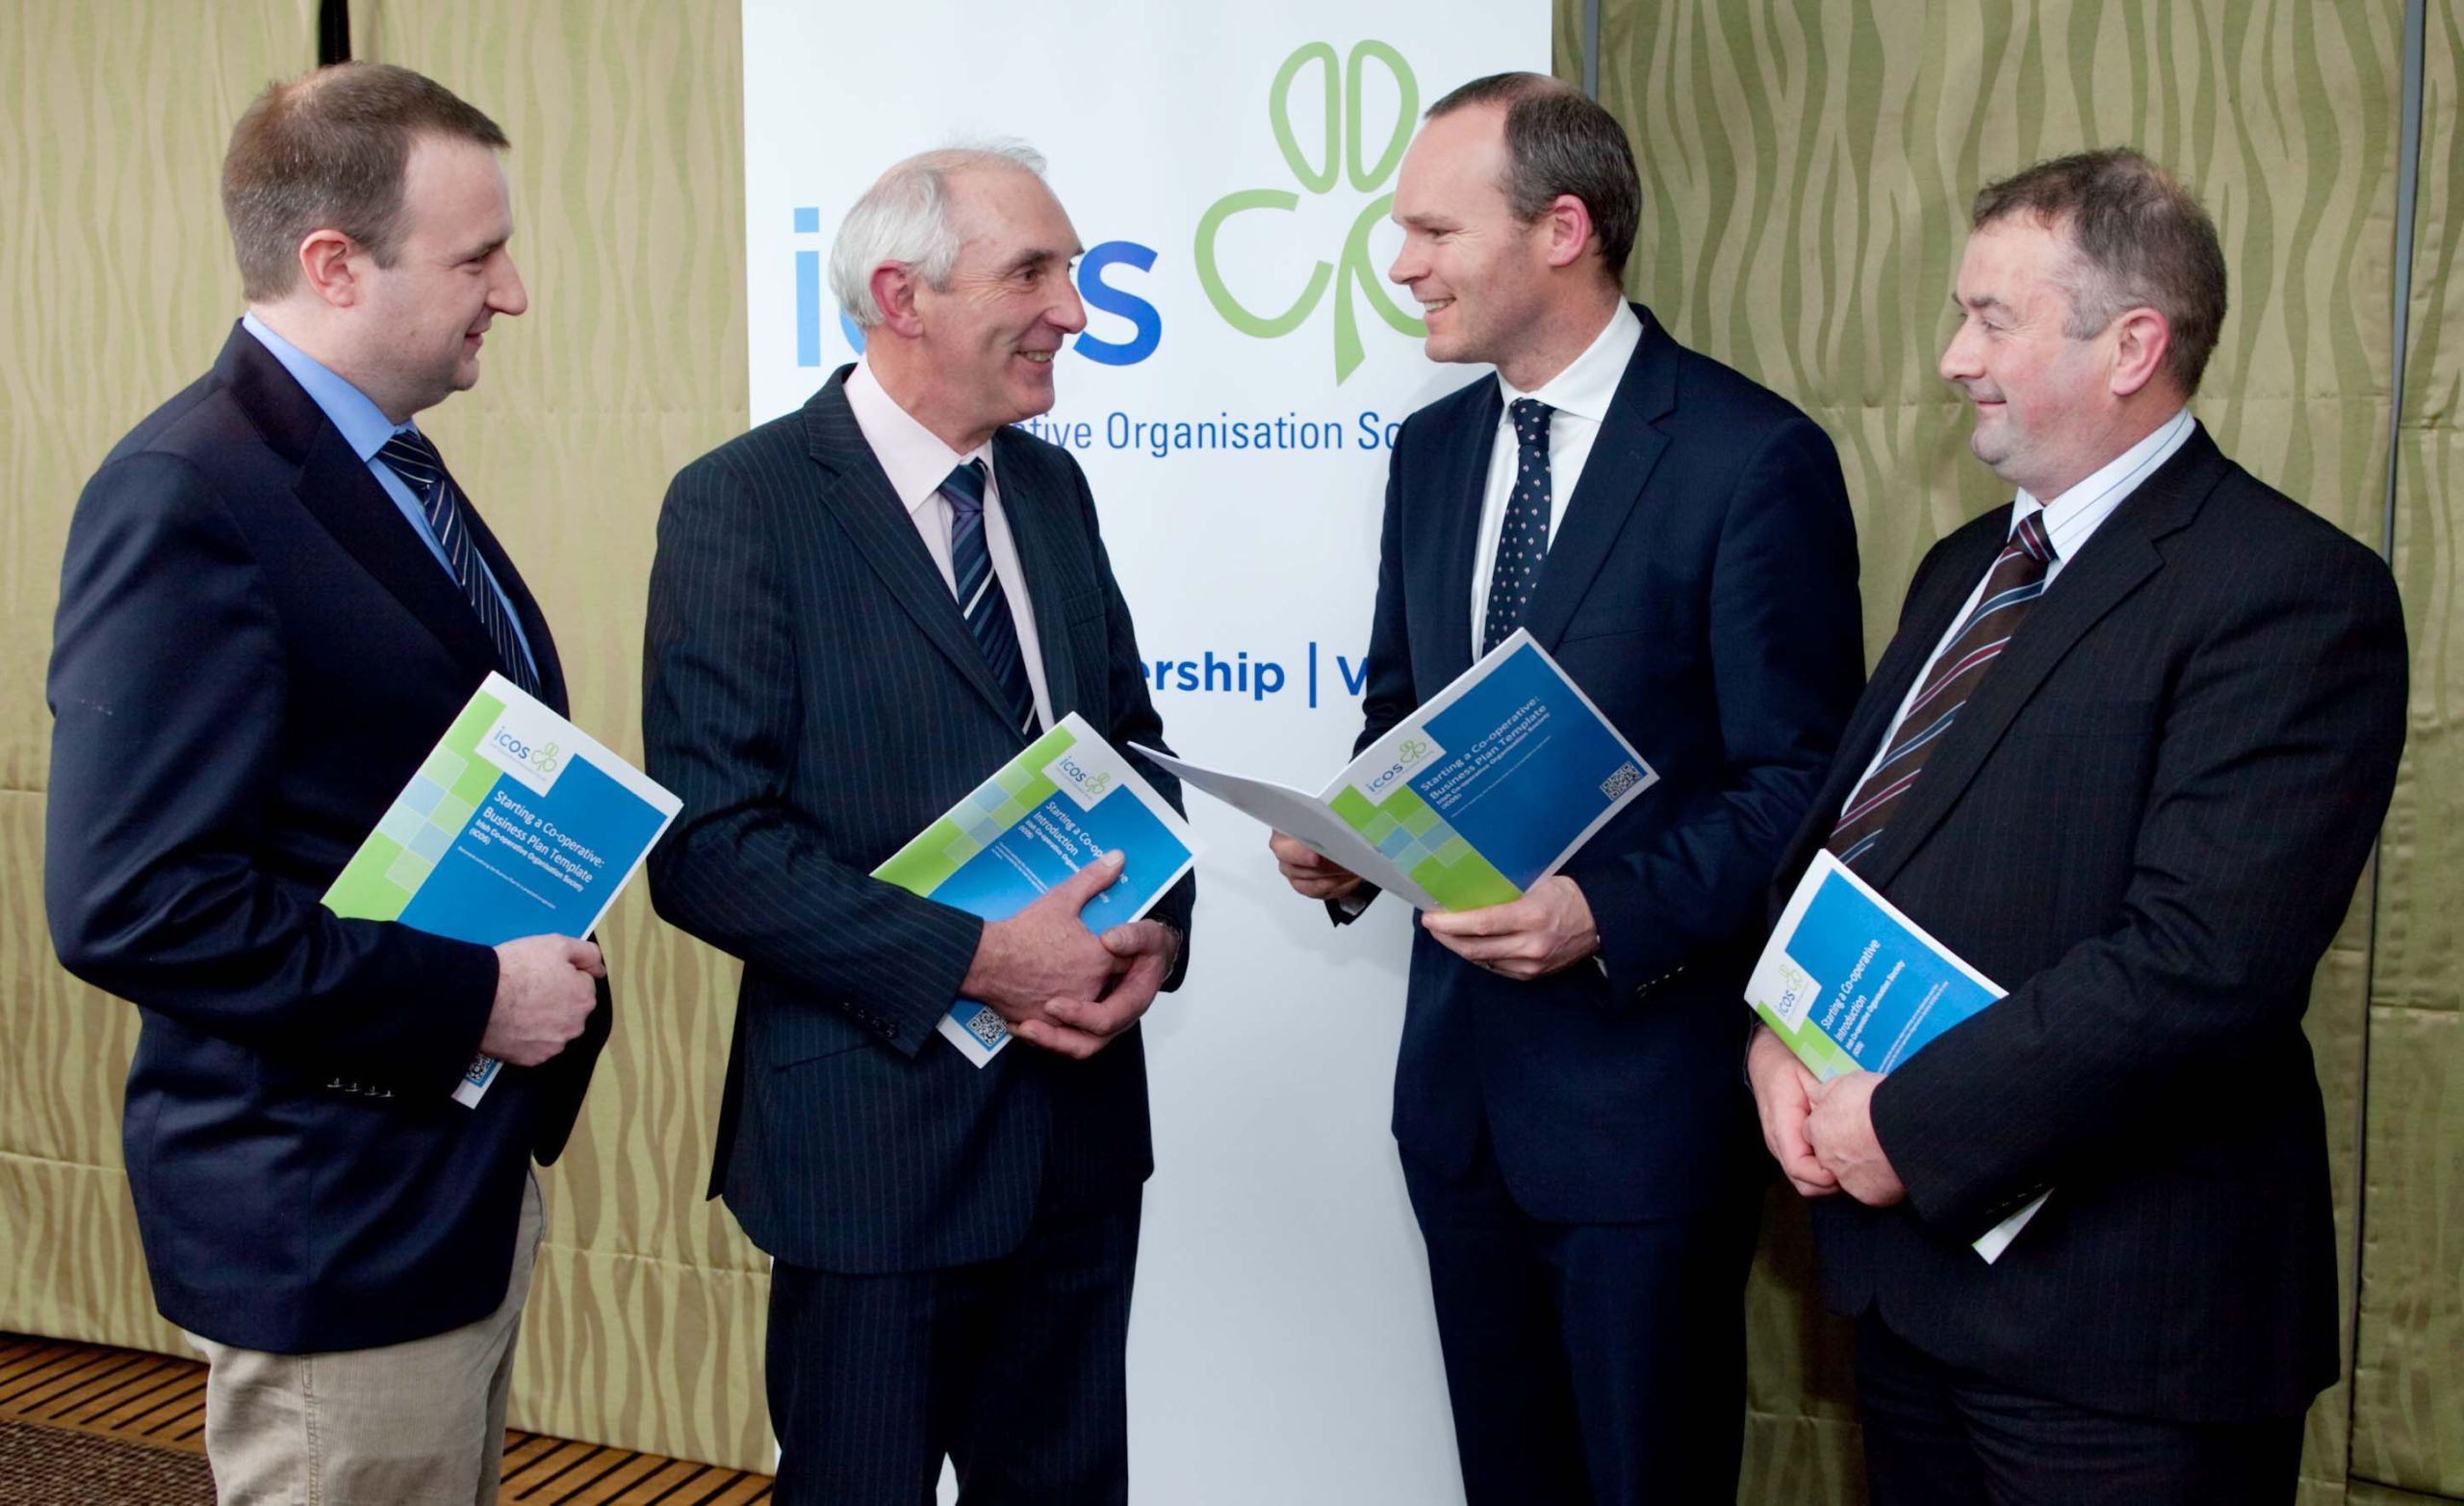 LEADERSHIP AGENDA Agriculture, Marine & Food Minister Simon Coveney TD with Pat McLoughlin, President ICOS, Tom O'Callaghan, CEO, ICOS (left) and Bertie O'Leary, Vice-President ICOS (recently elected Chairman of Dairygold Co-operative). The Minister addressed Chairpersons and Board Directors of dairy co-operatives following their participation in the ICOS Leadership Training programme at Charleville, Co. Cork. The Minister also launched a new introductory guide and business planning template designed by ICOS to encourage groups to establish new co-operative enterprises throughout Ireland. The initiative marks the start of the UN International Year of Co-operatives 2012 which is also being promoted in Ireland by ICOS. At the meeting, the Minister said he intends to work in partnership with ICOS and other dairy industry bodies to ensure that a cohesive and strategic approach is adopted towards the expansion of Irish dairy output and the overall competitiveness of Irish exports on global markets. Photo: Kieran Clancy